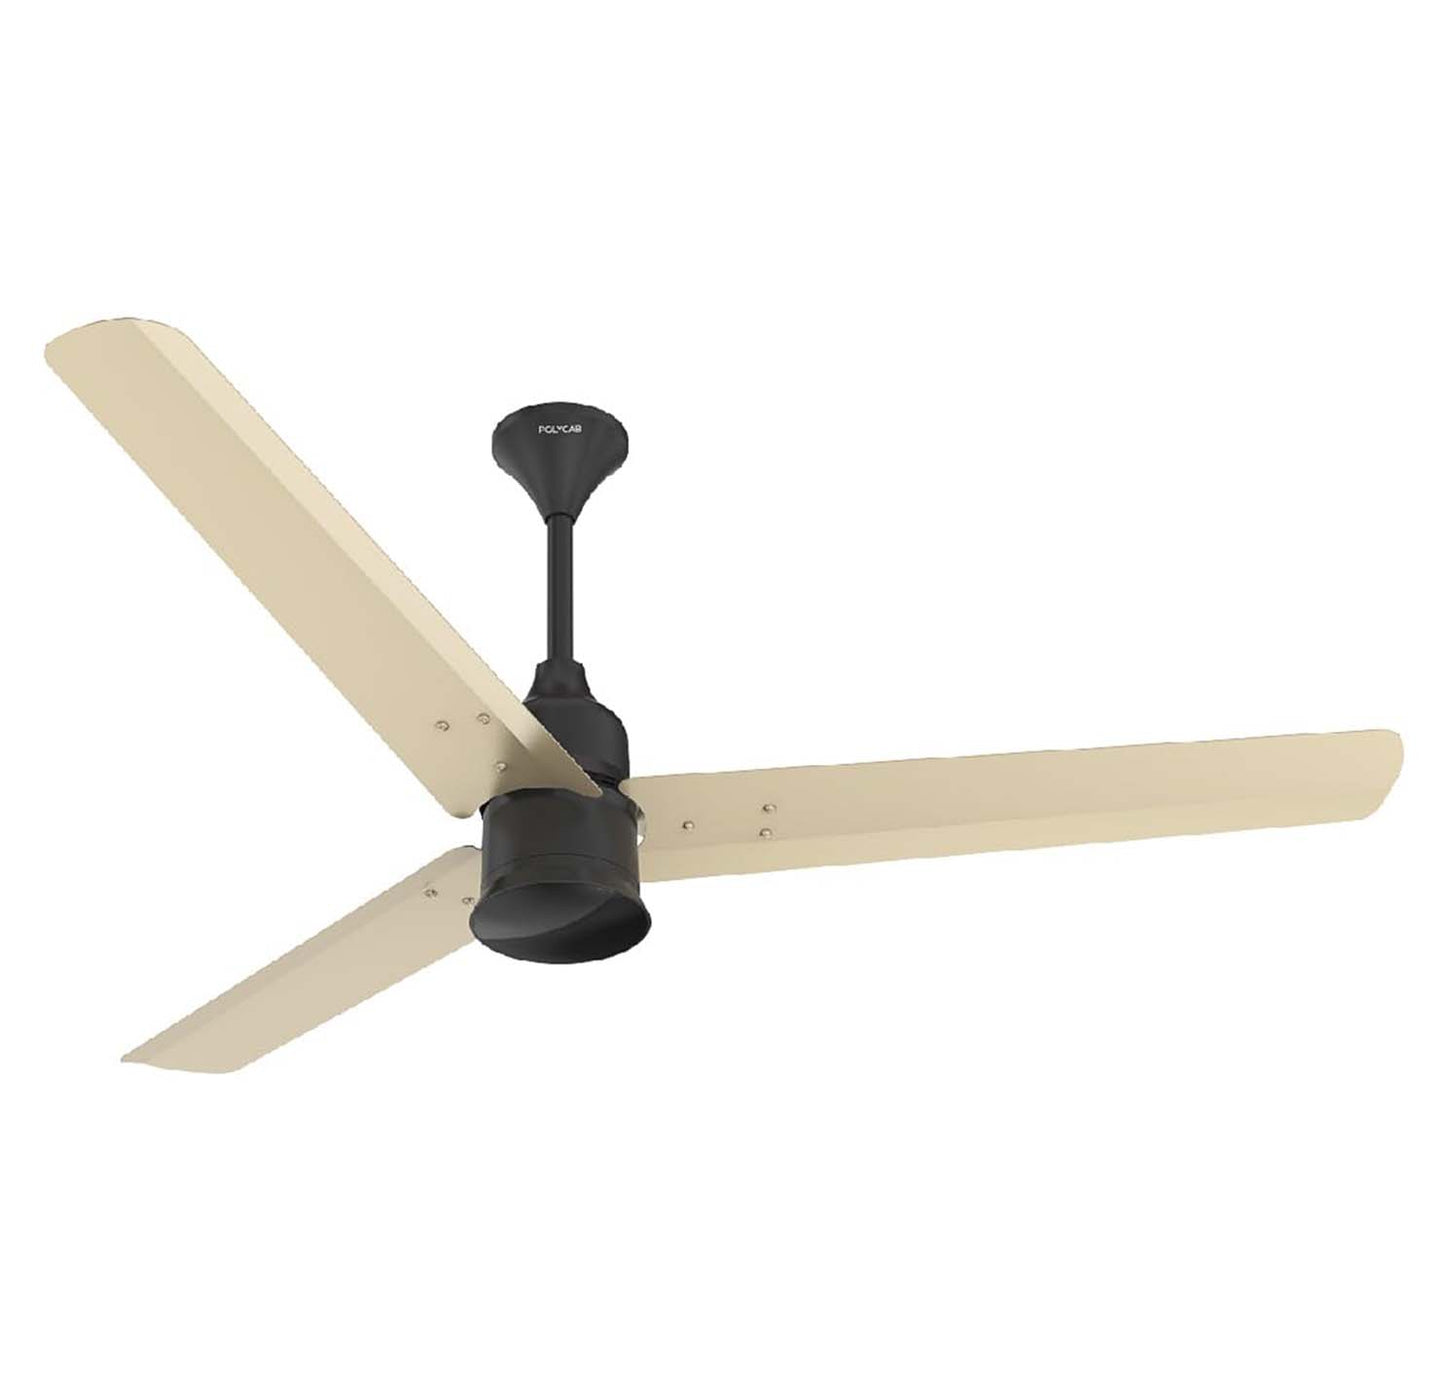 Polycab Silenco Advance BLDC Mini Ceiling Fan With 5 Star Rated - 1200mm - Pearl Beige